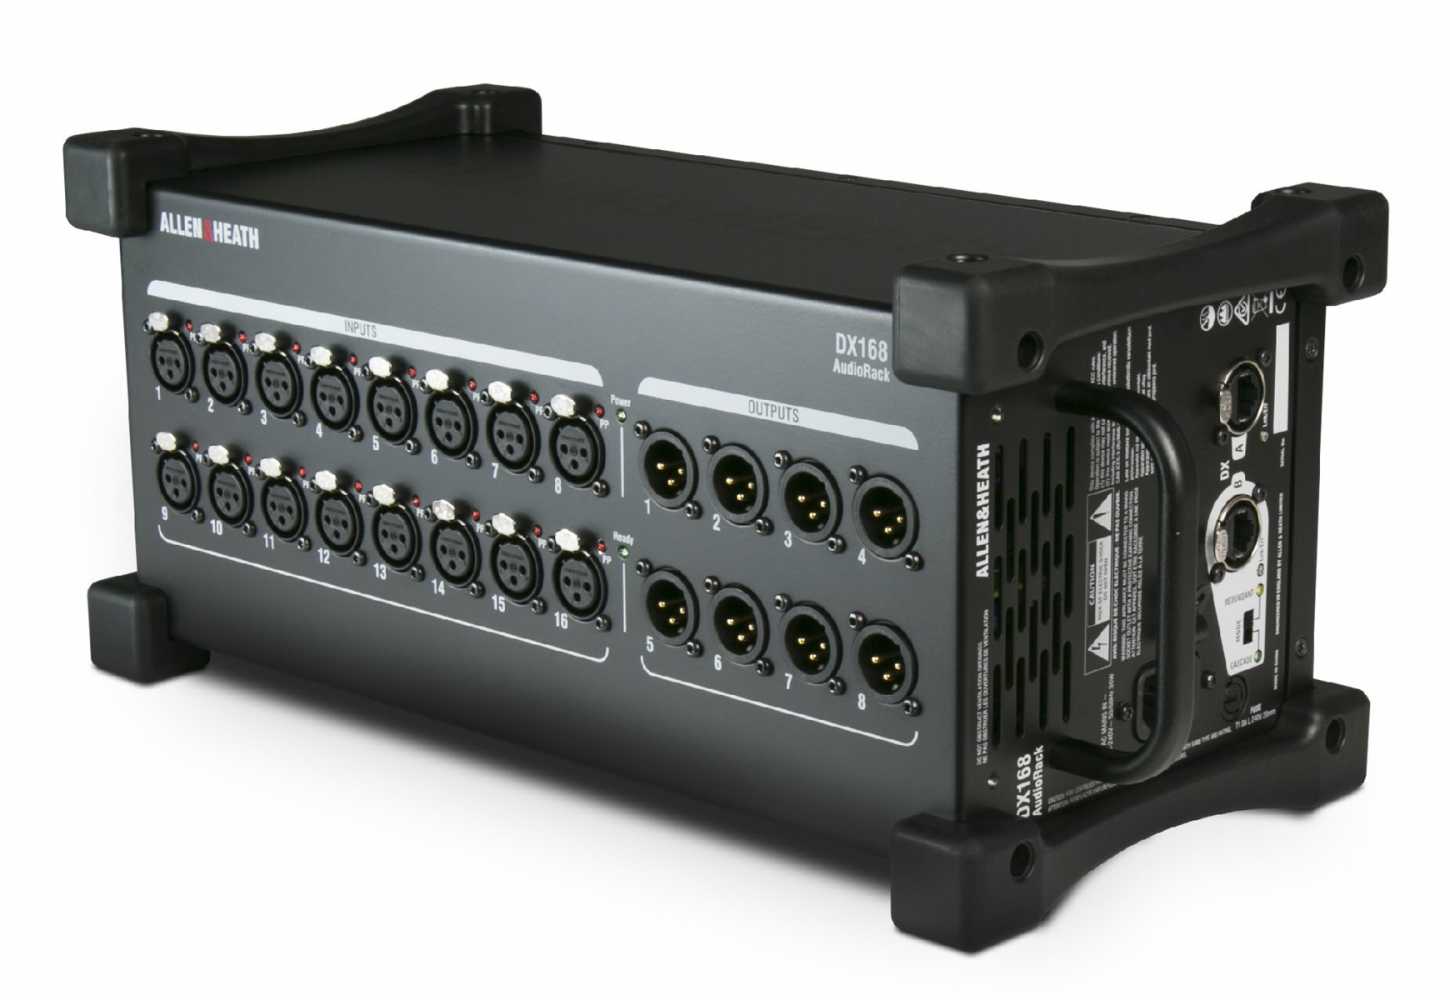 DX168 features 16 XLR mic inputs and 8 XLR line outputs